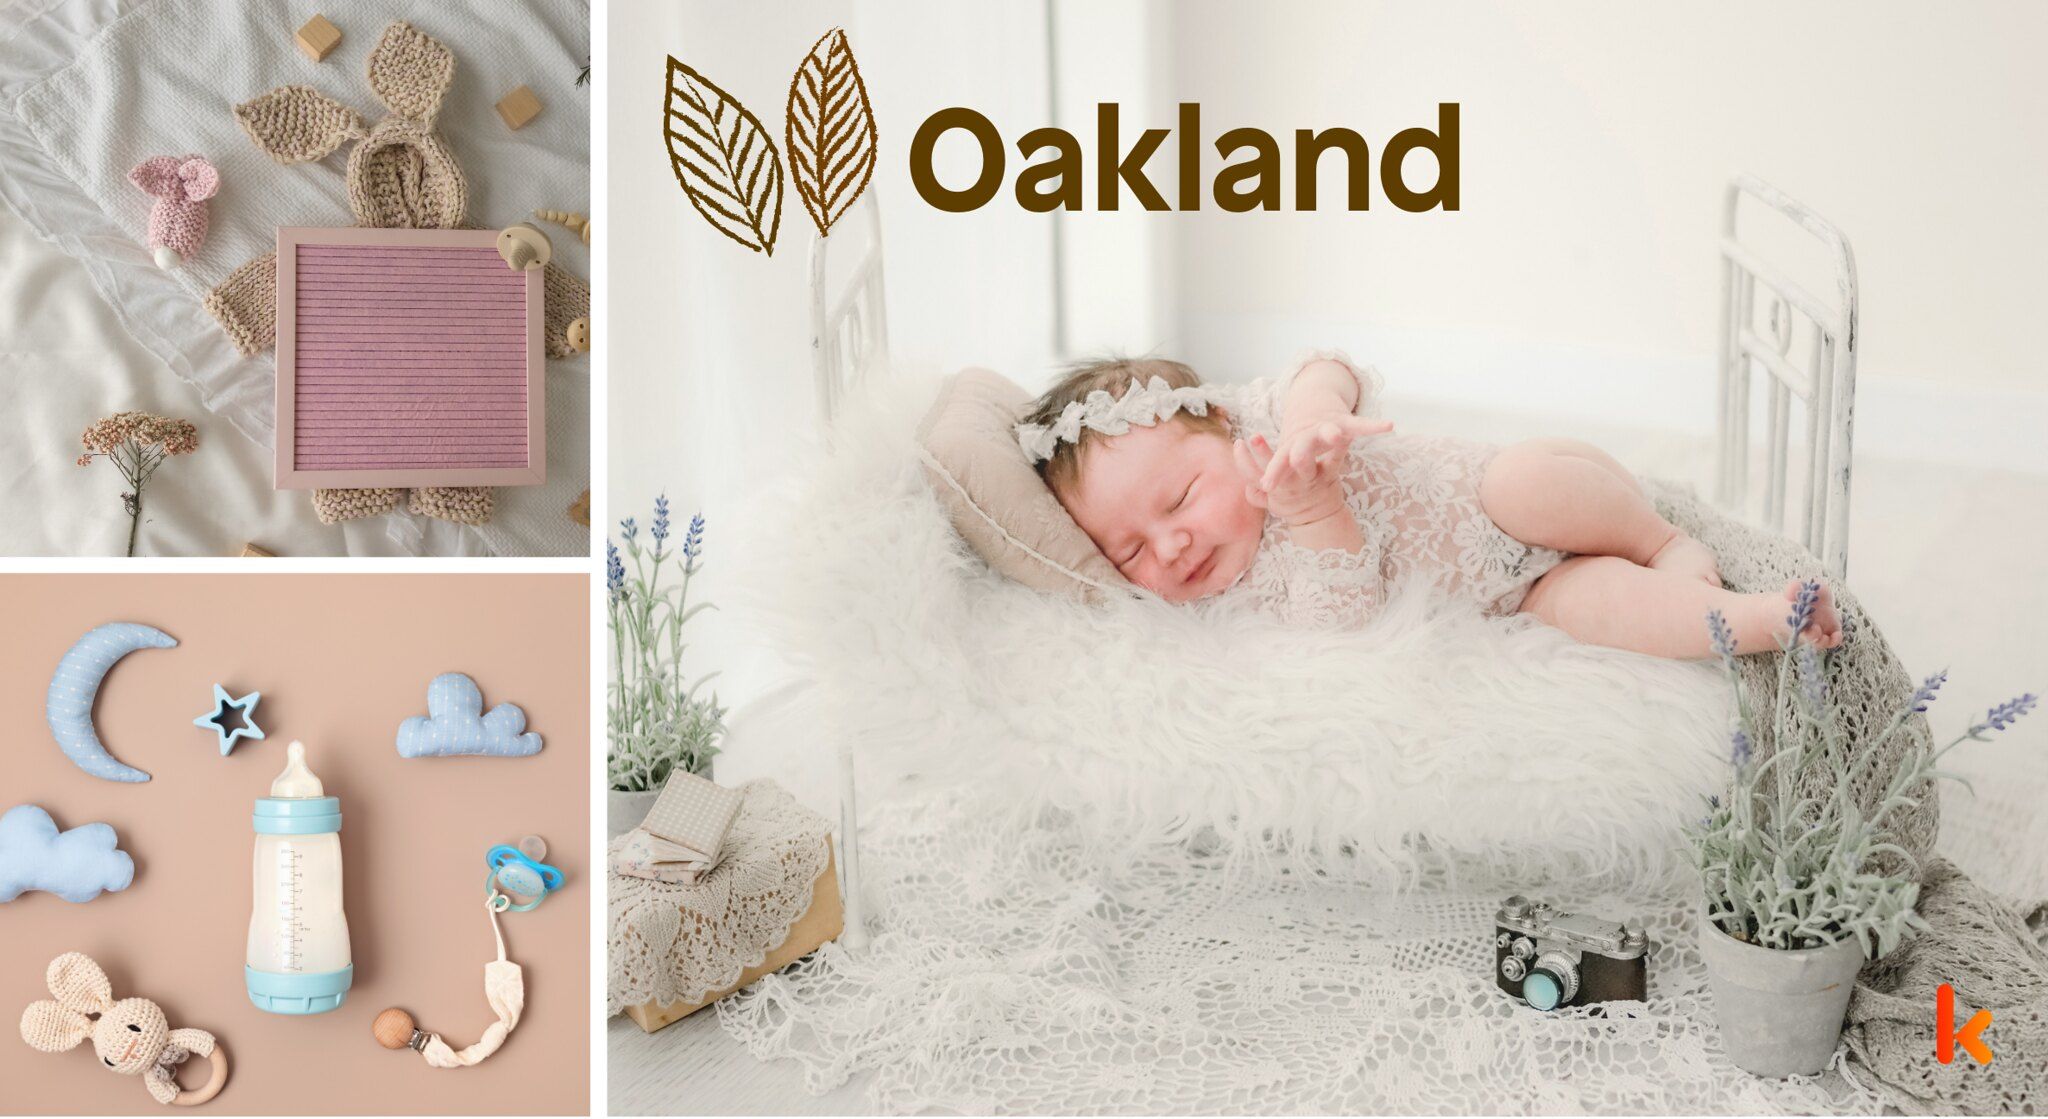 Meaning of the name Oakland